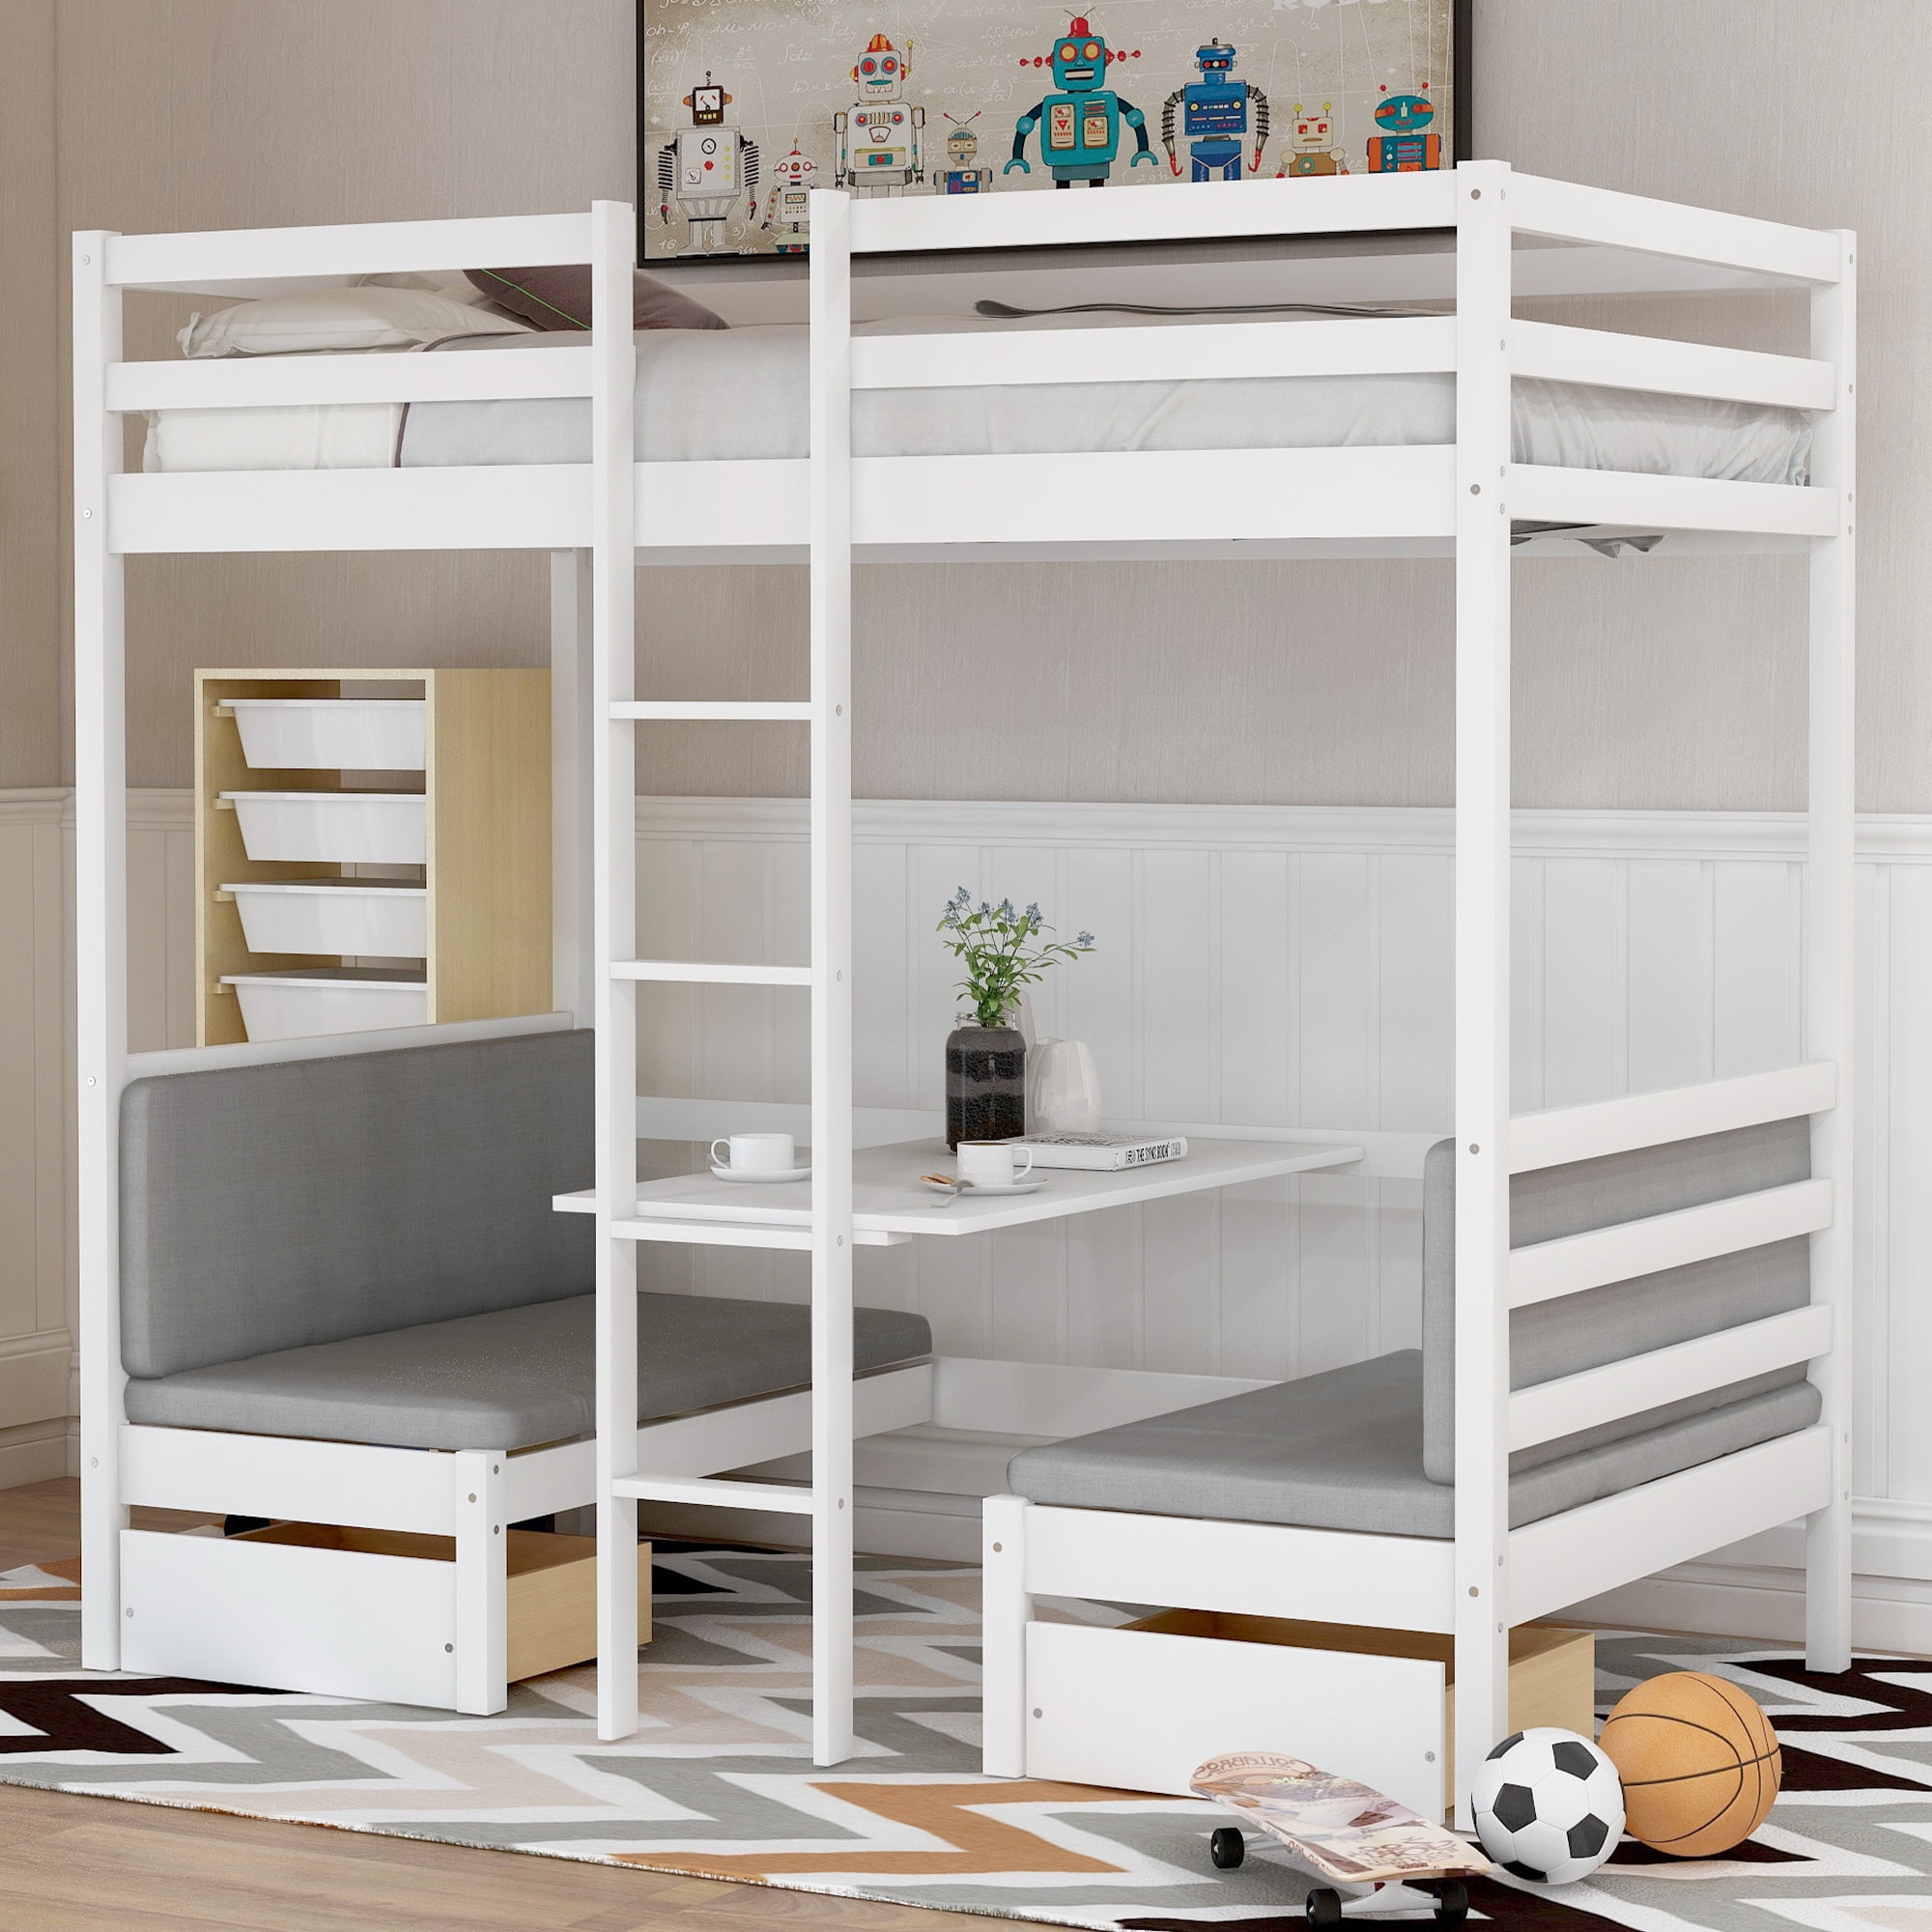 Euroco Solid Wood Convertible Twin Bunk, Bunk Bed With Dresser